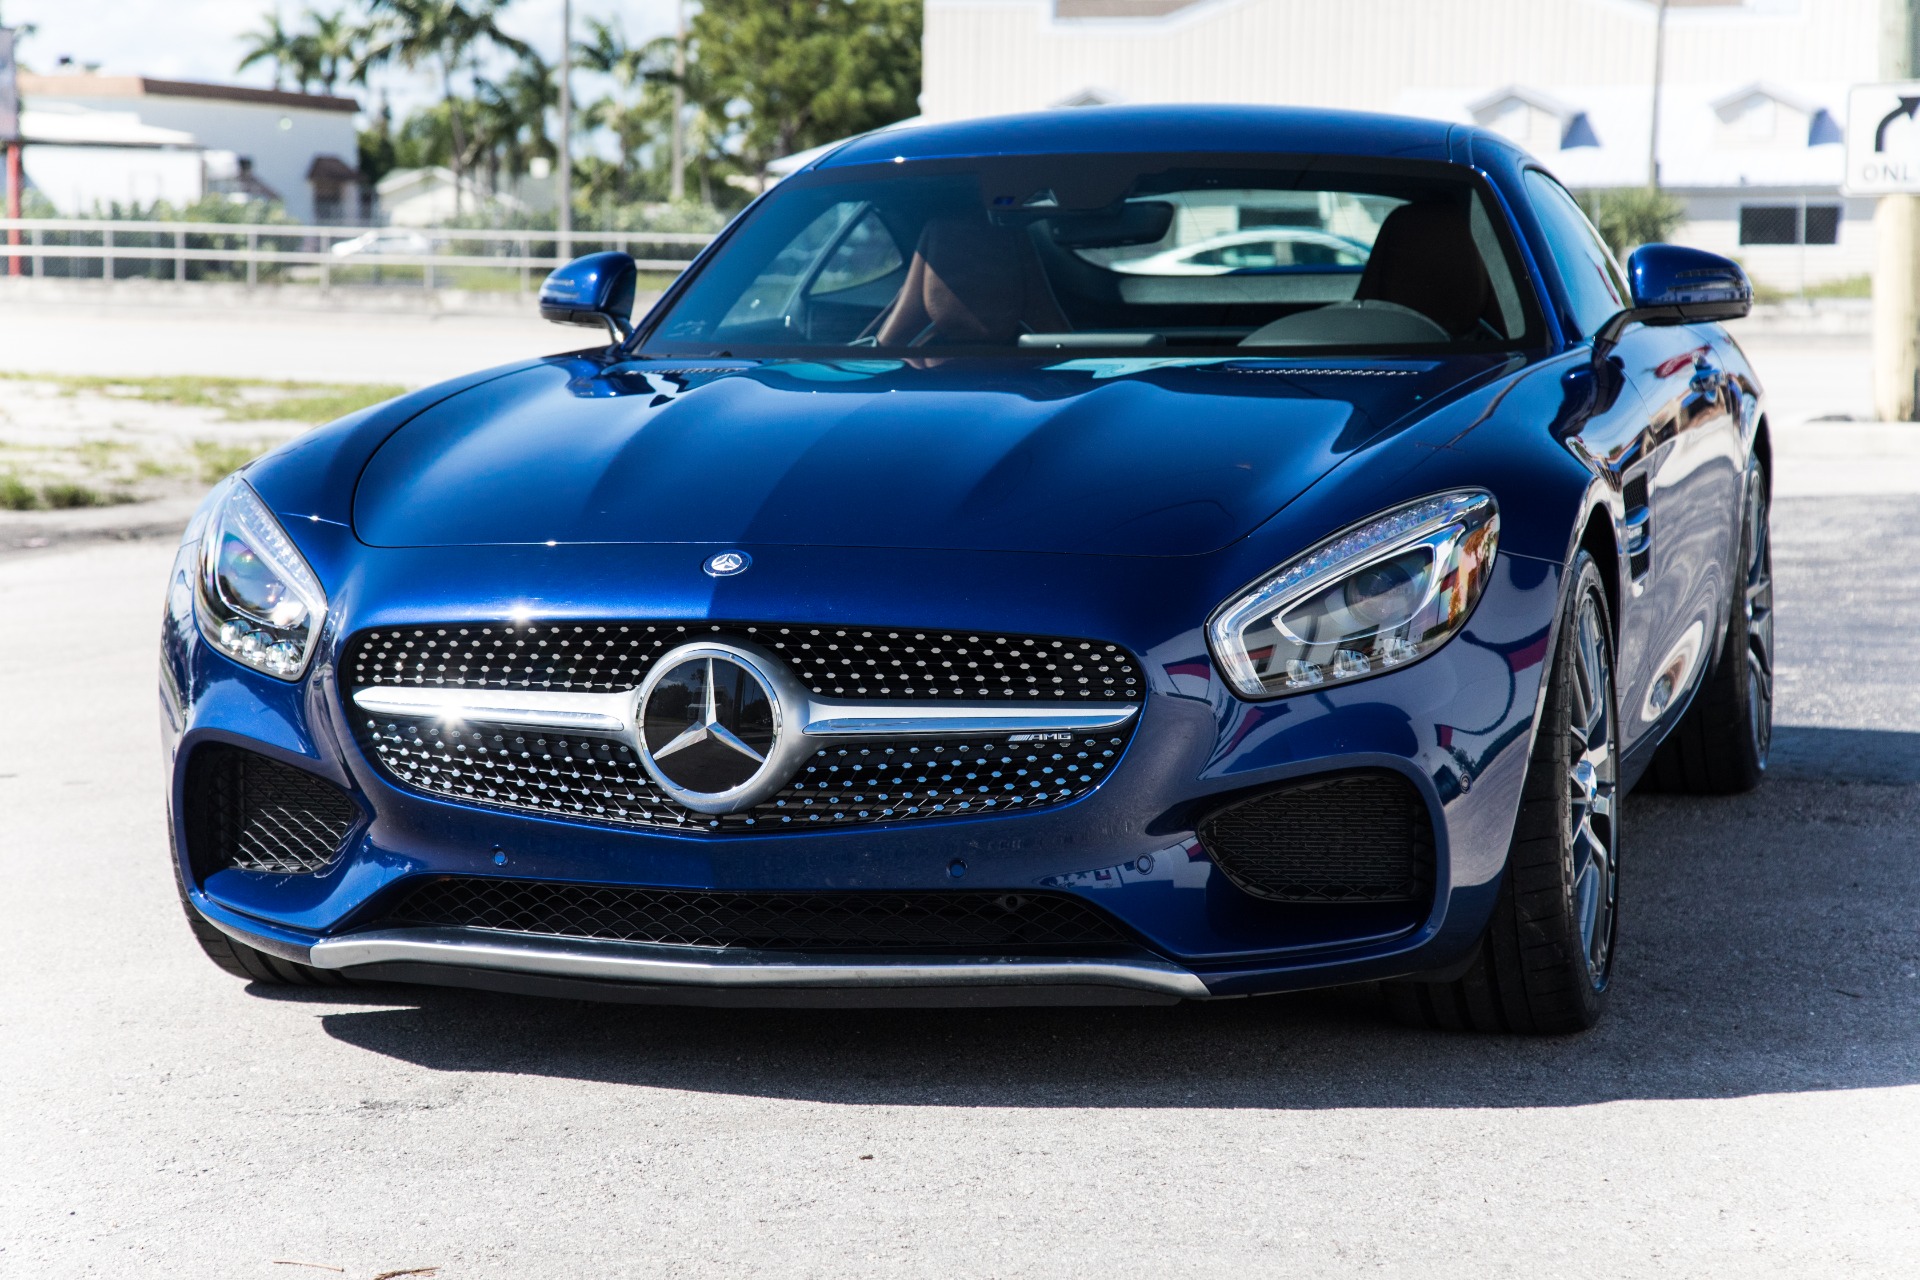 Used 2016 Mercedes Benz AMG GT S For Sale 92 900 Marino 